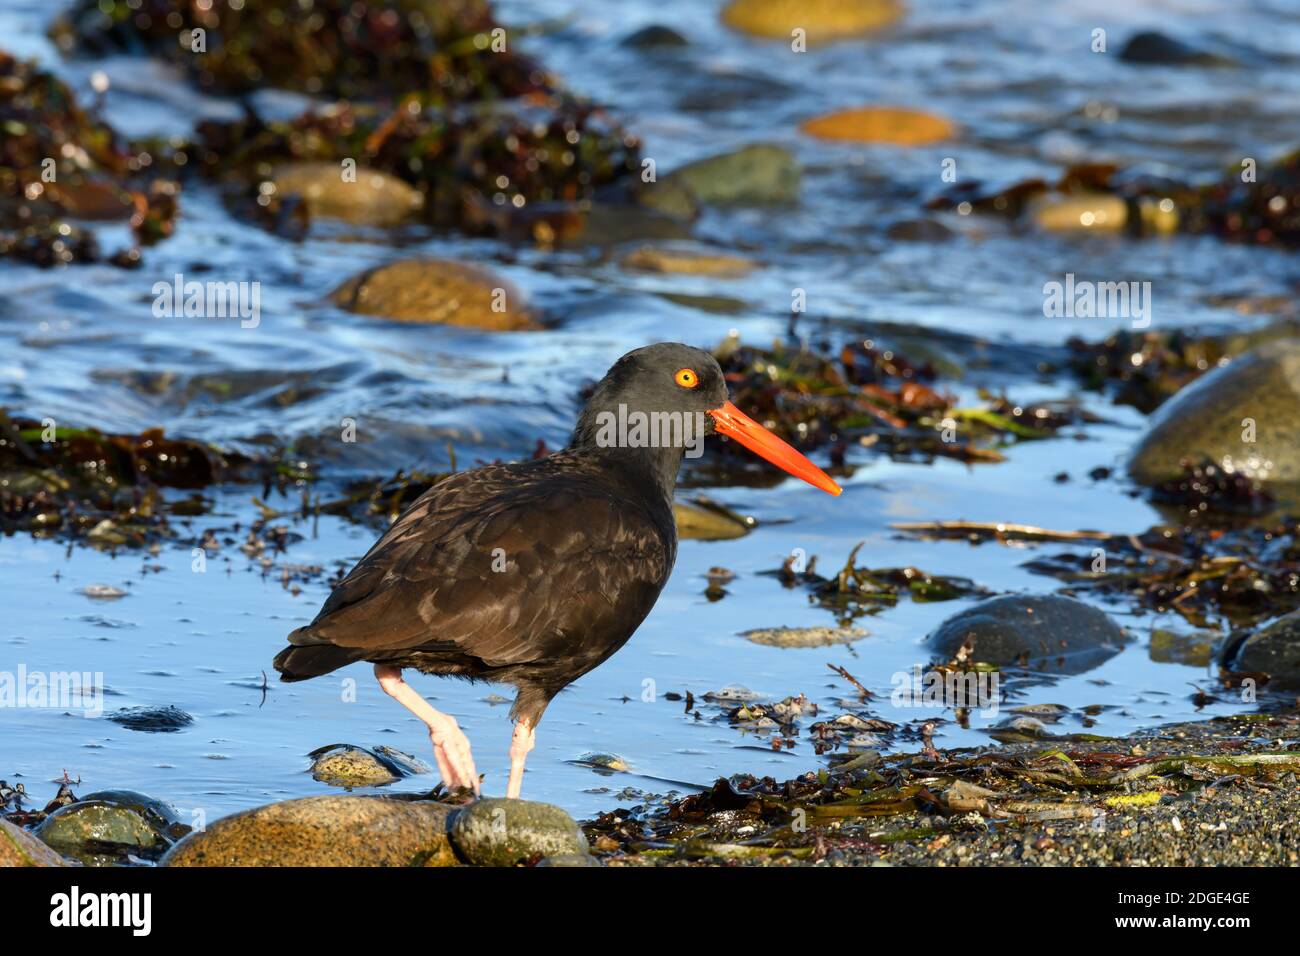 Oyster catcher with orange bill and pink feet Stock Photo